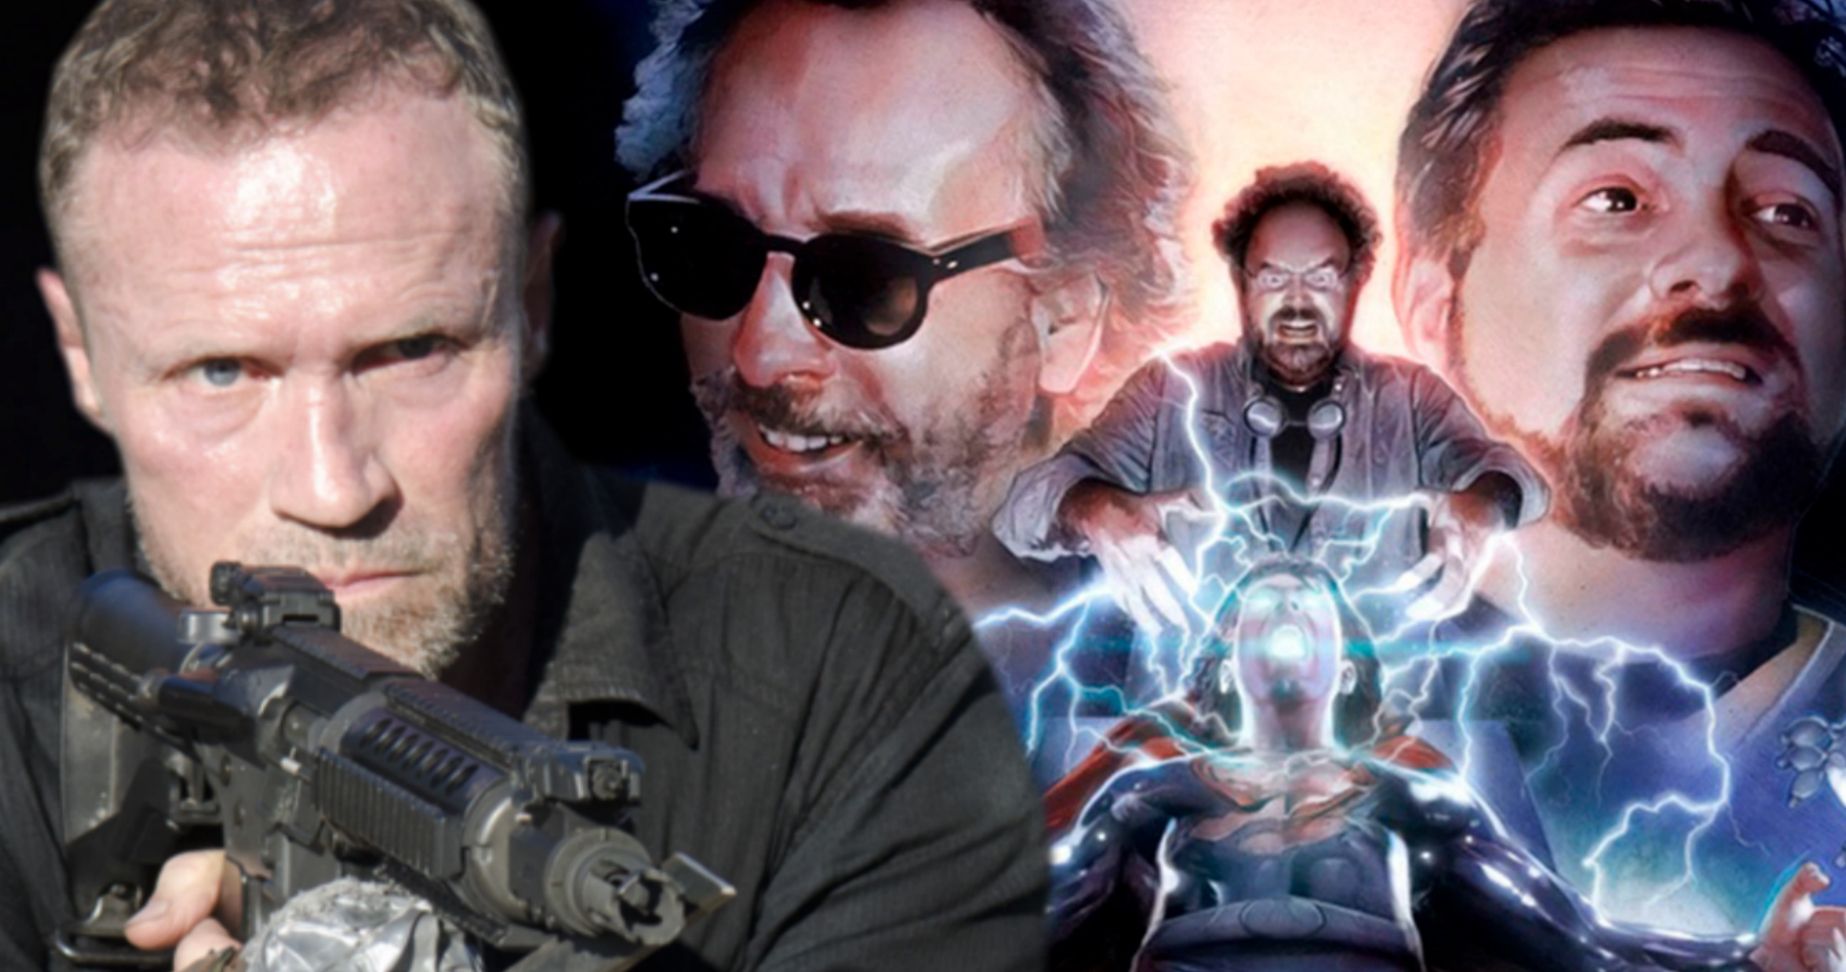 Kevin Smith Wanted Mallrats Co-Star Michael Rooker as Lex Luthor in Superman Lives